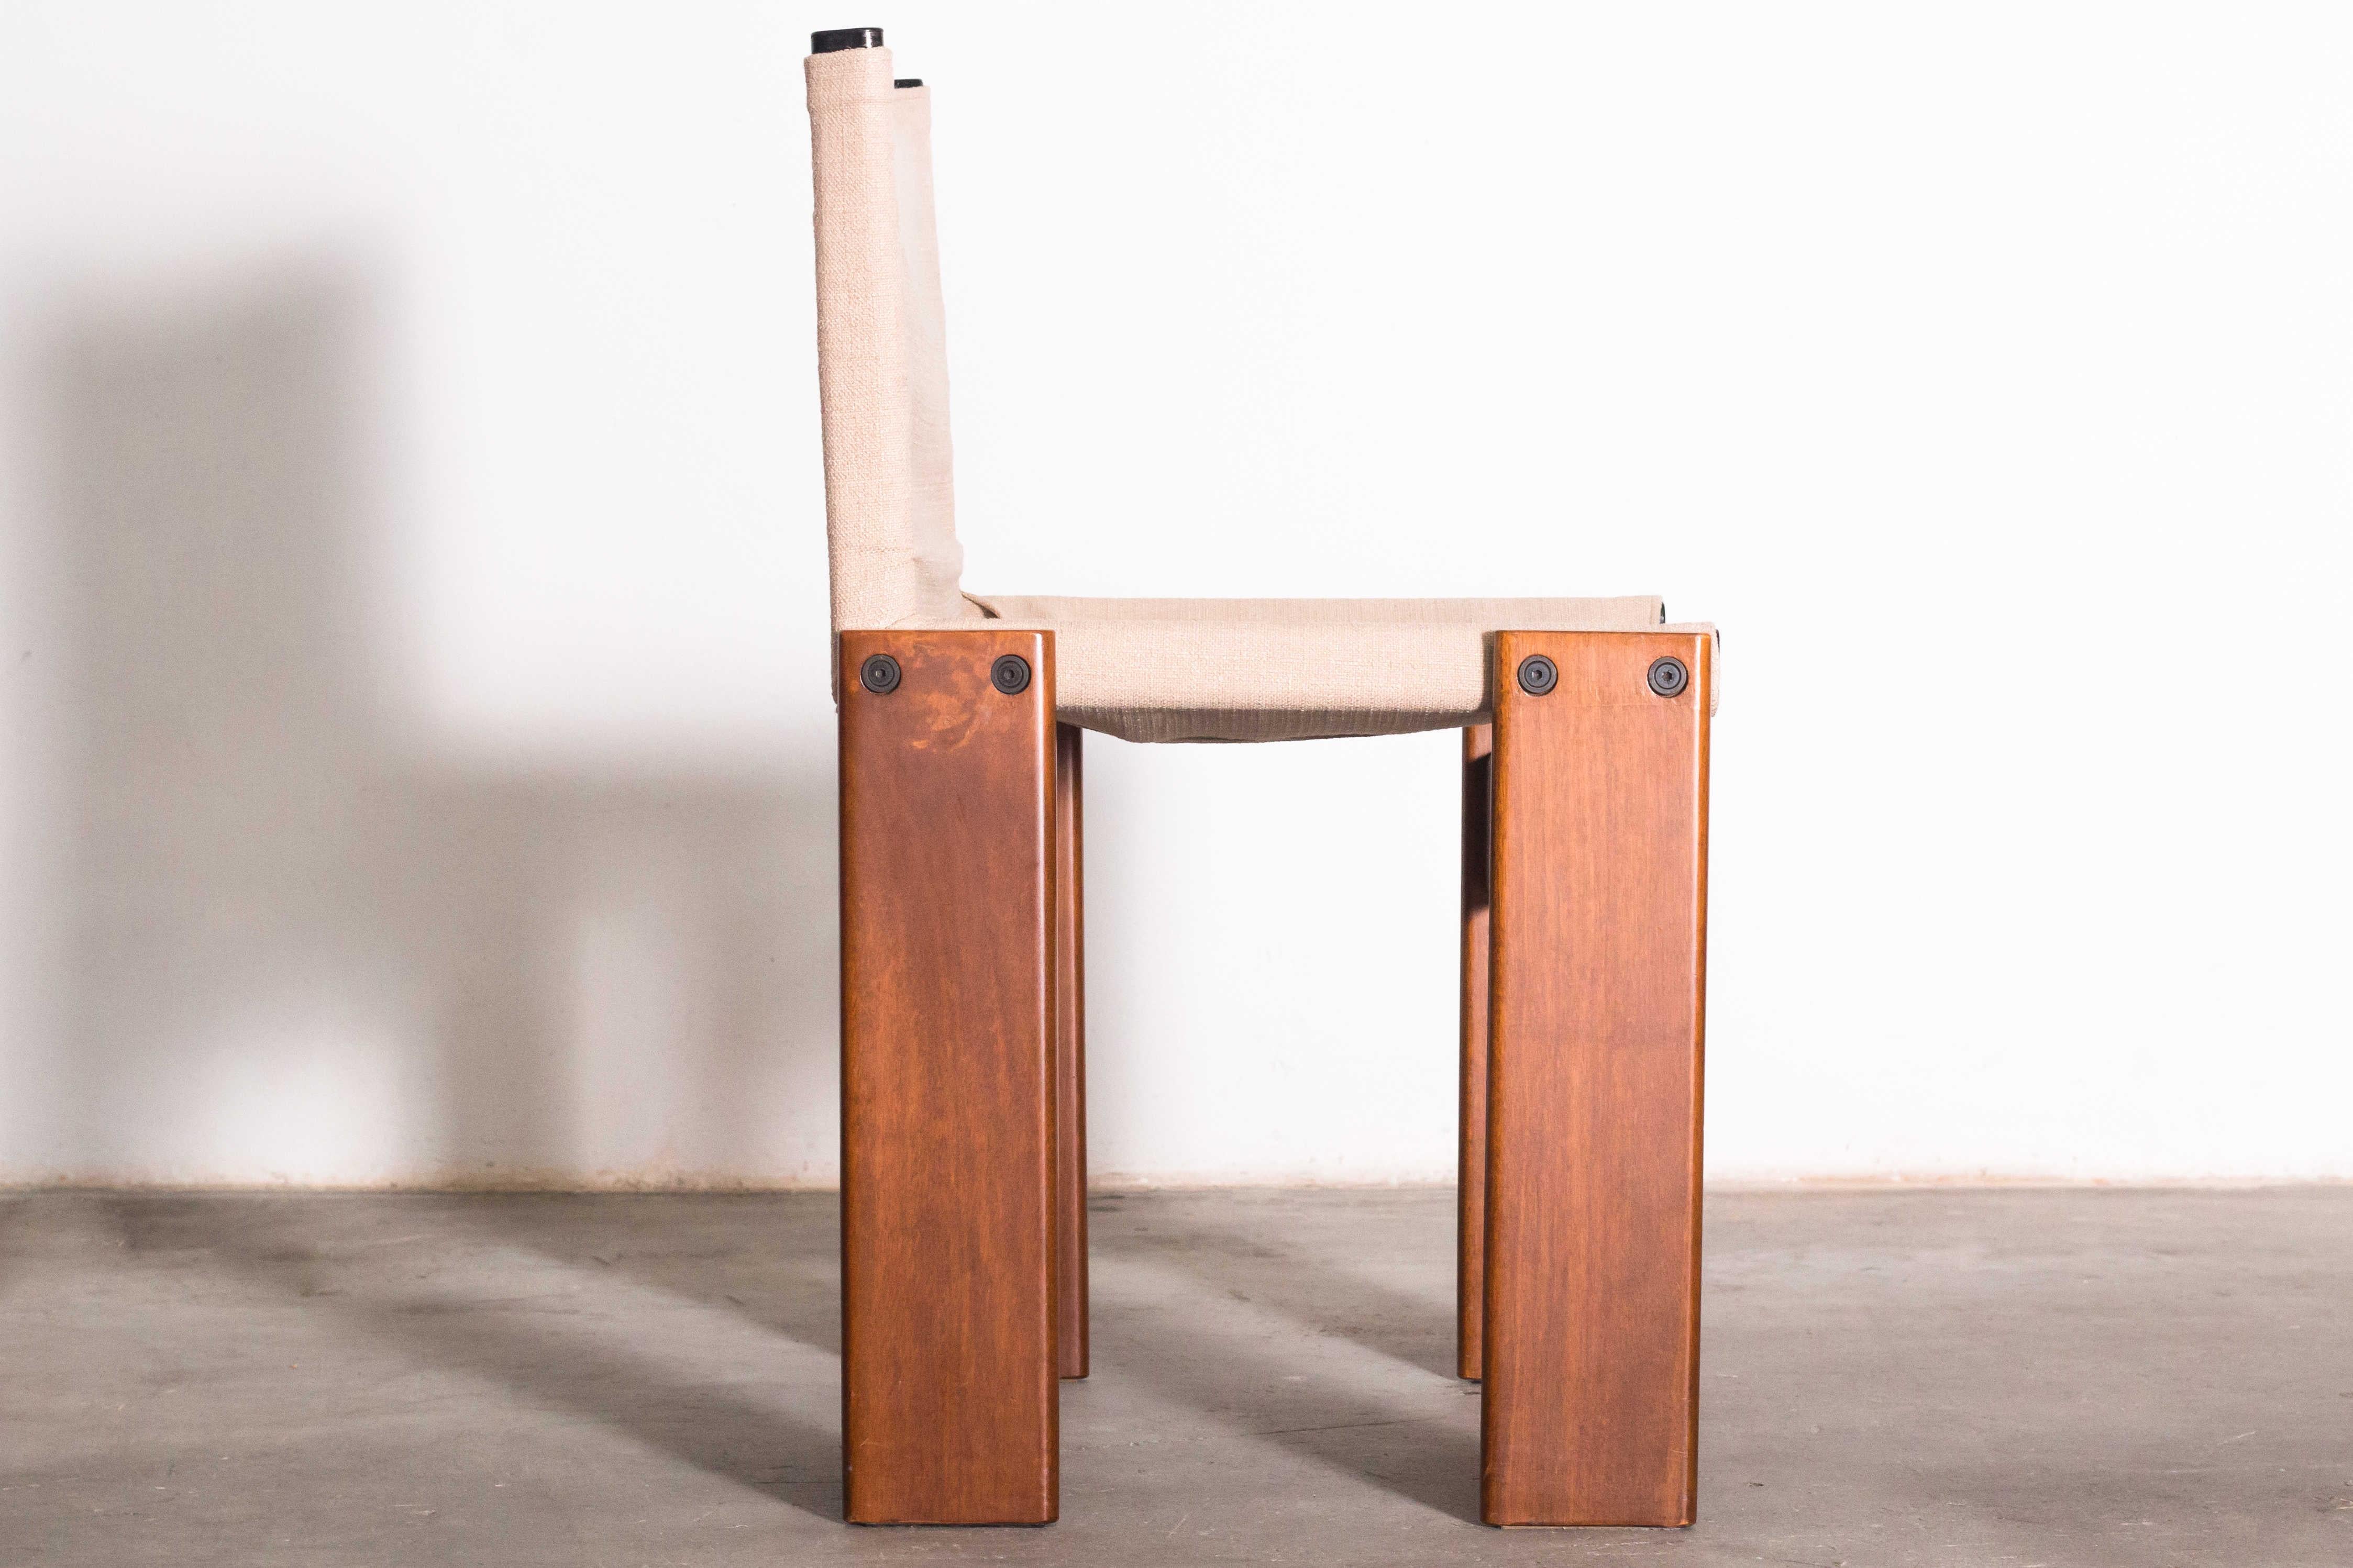 Other Monk Chairs by Afra & Tobia Scarpa, Raw Cloth